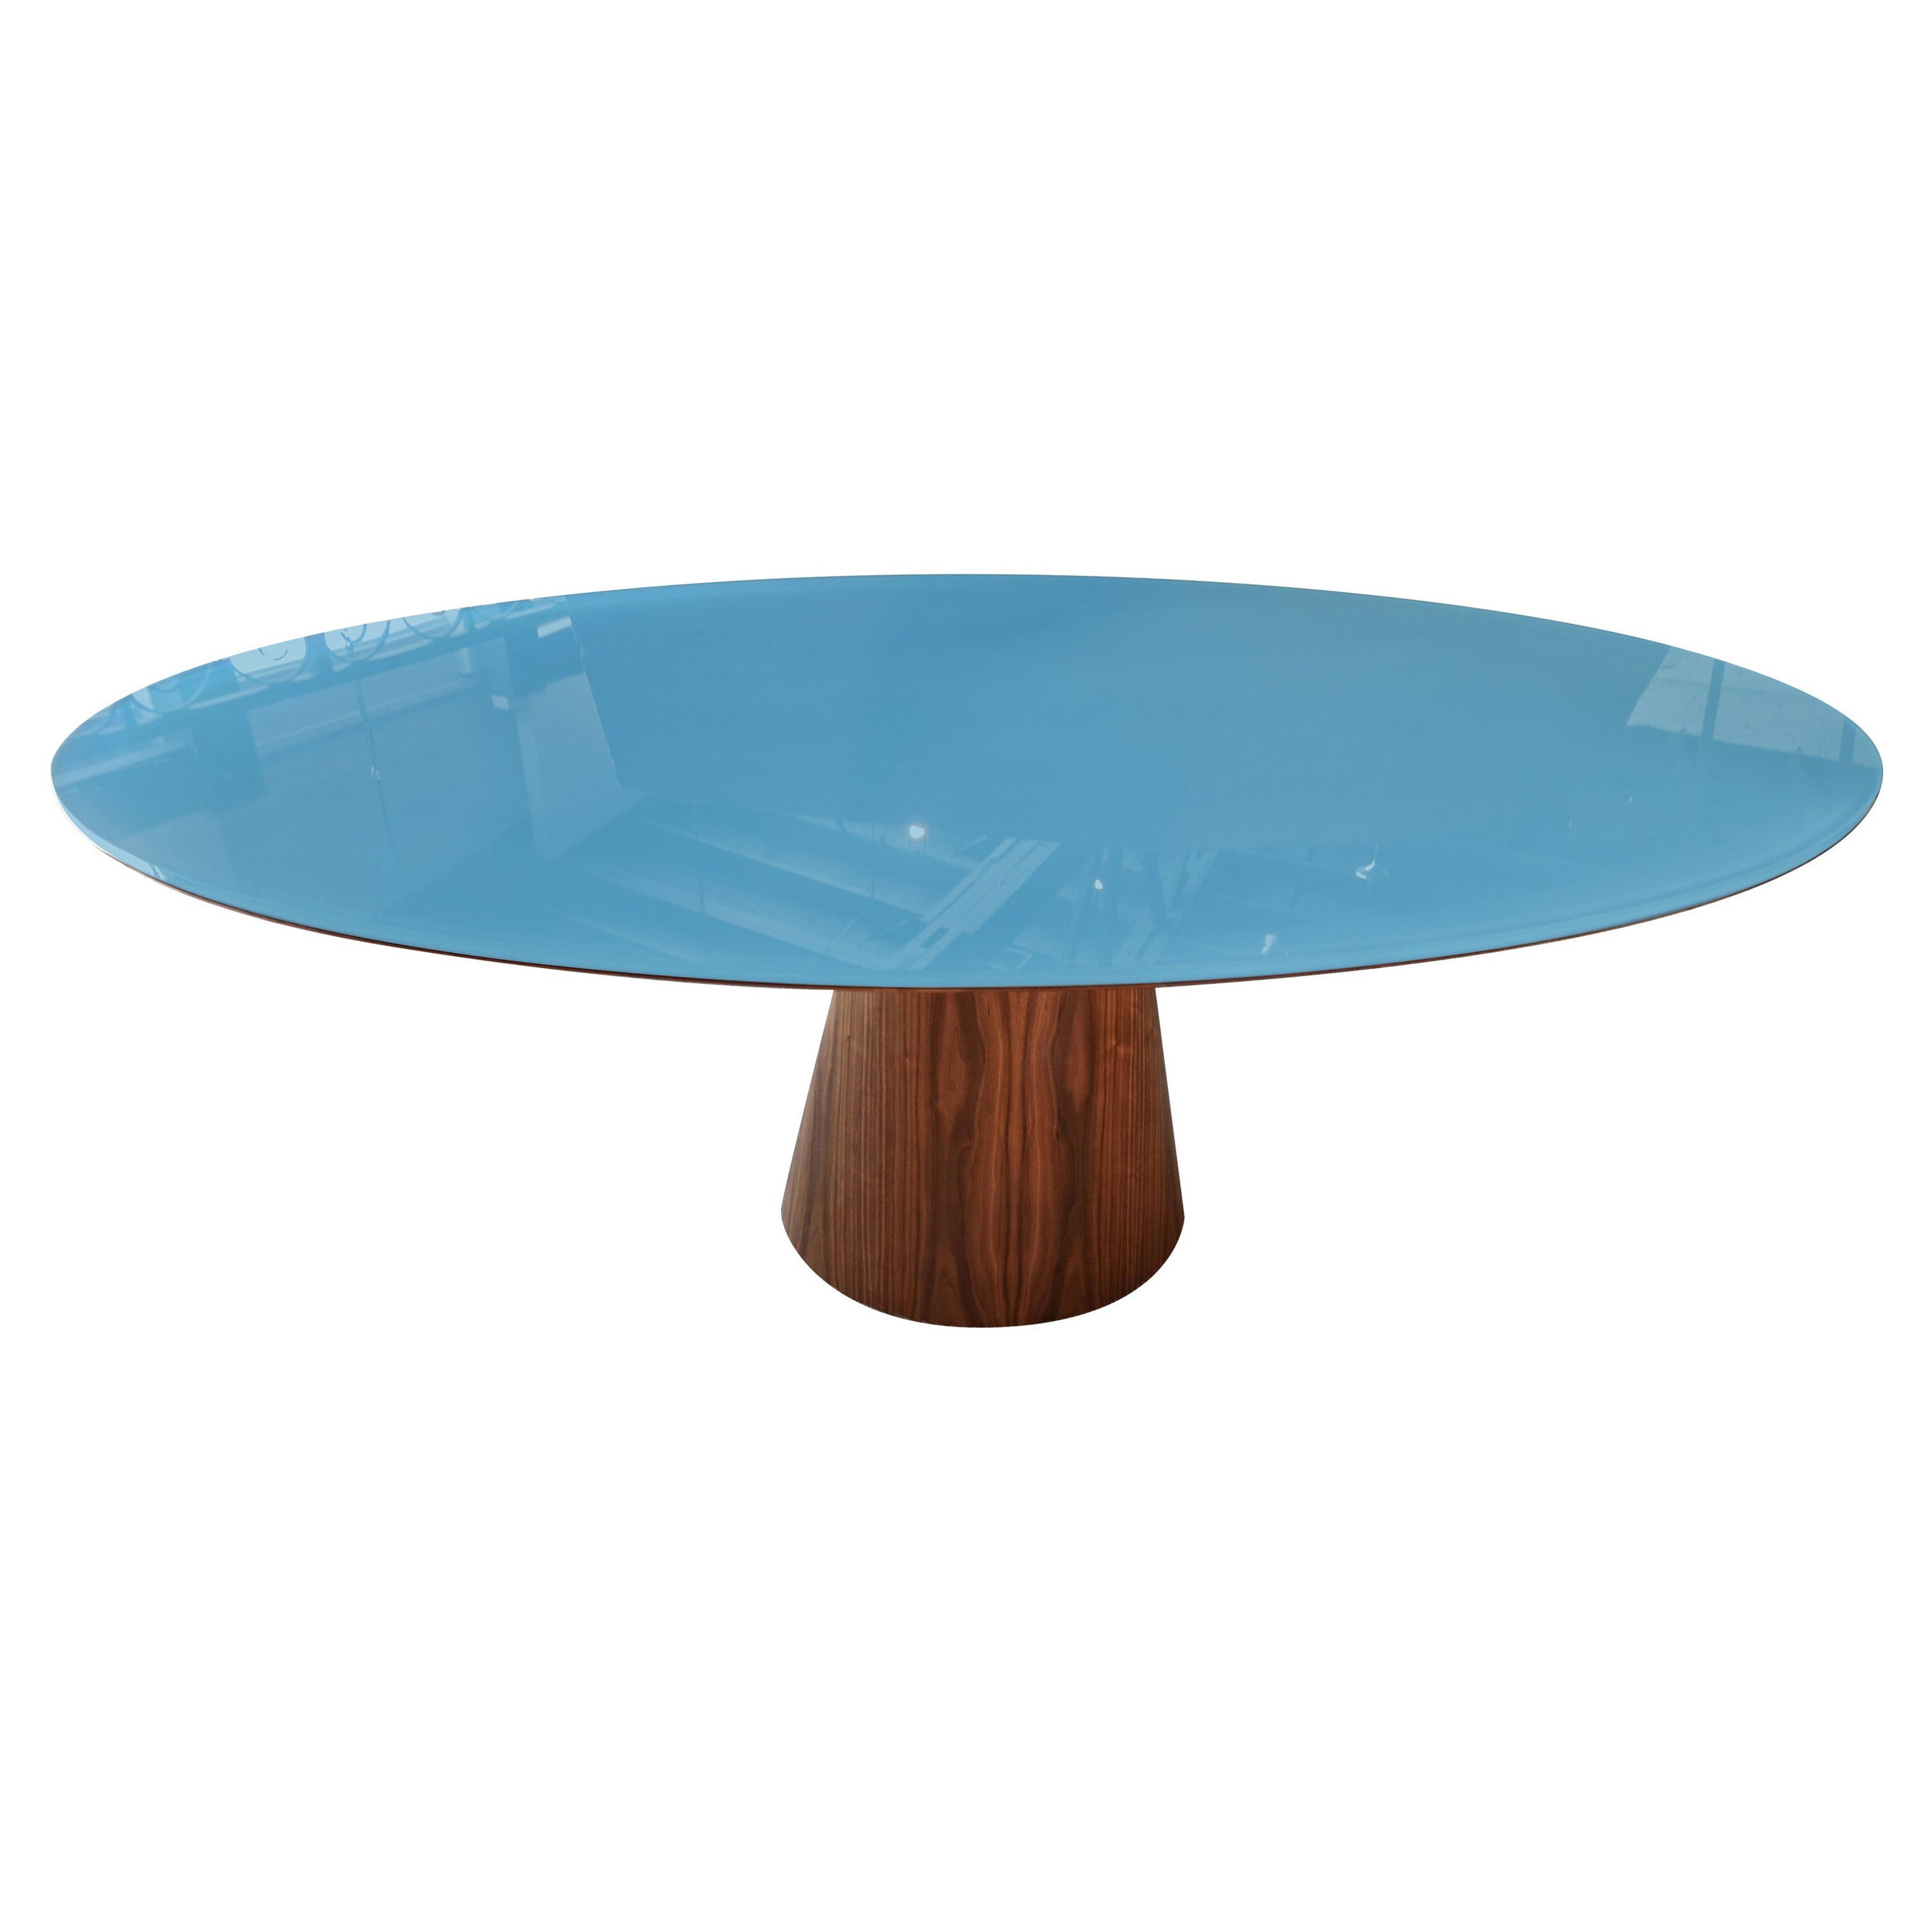 Custom Midcentury Style Walnut Oval Dining Table with Glass Top by Adesso For Sale